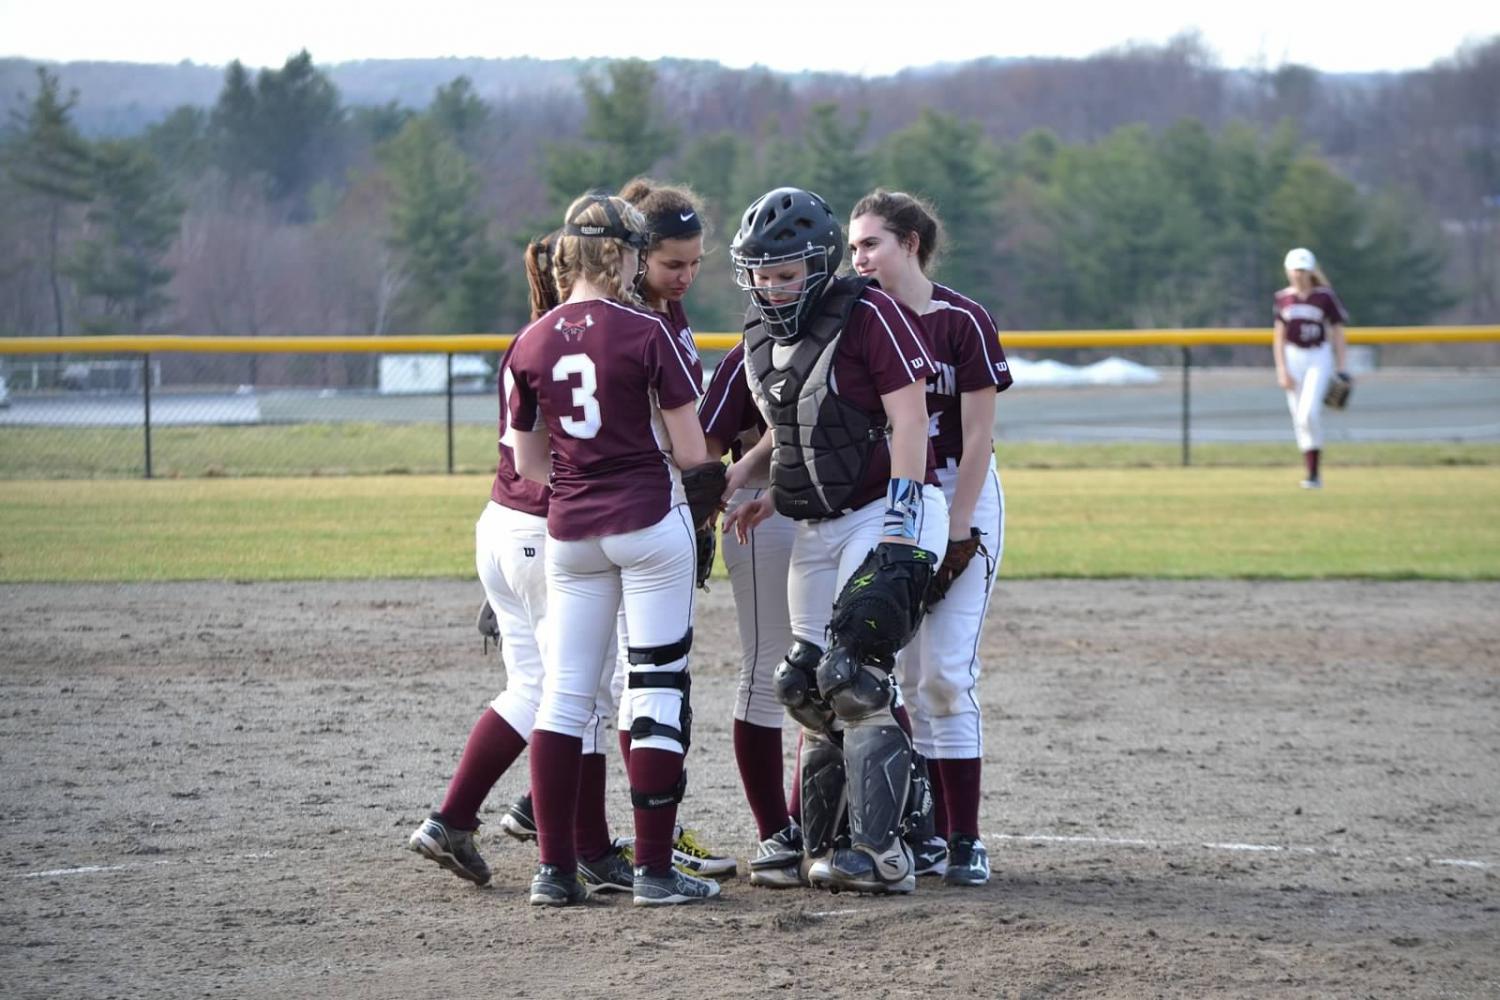 Girls softball has rough start, hopes to improve with practice